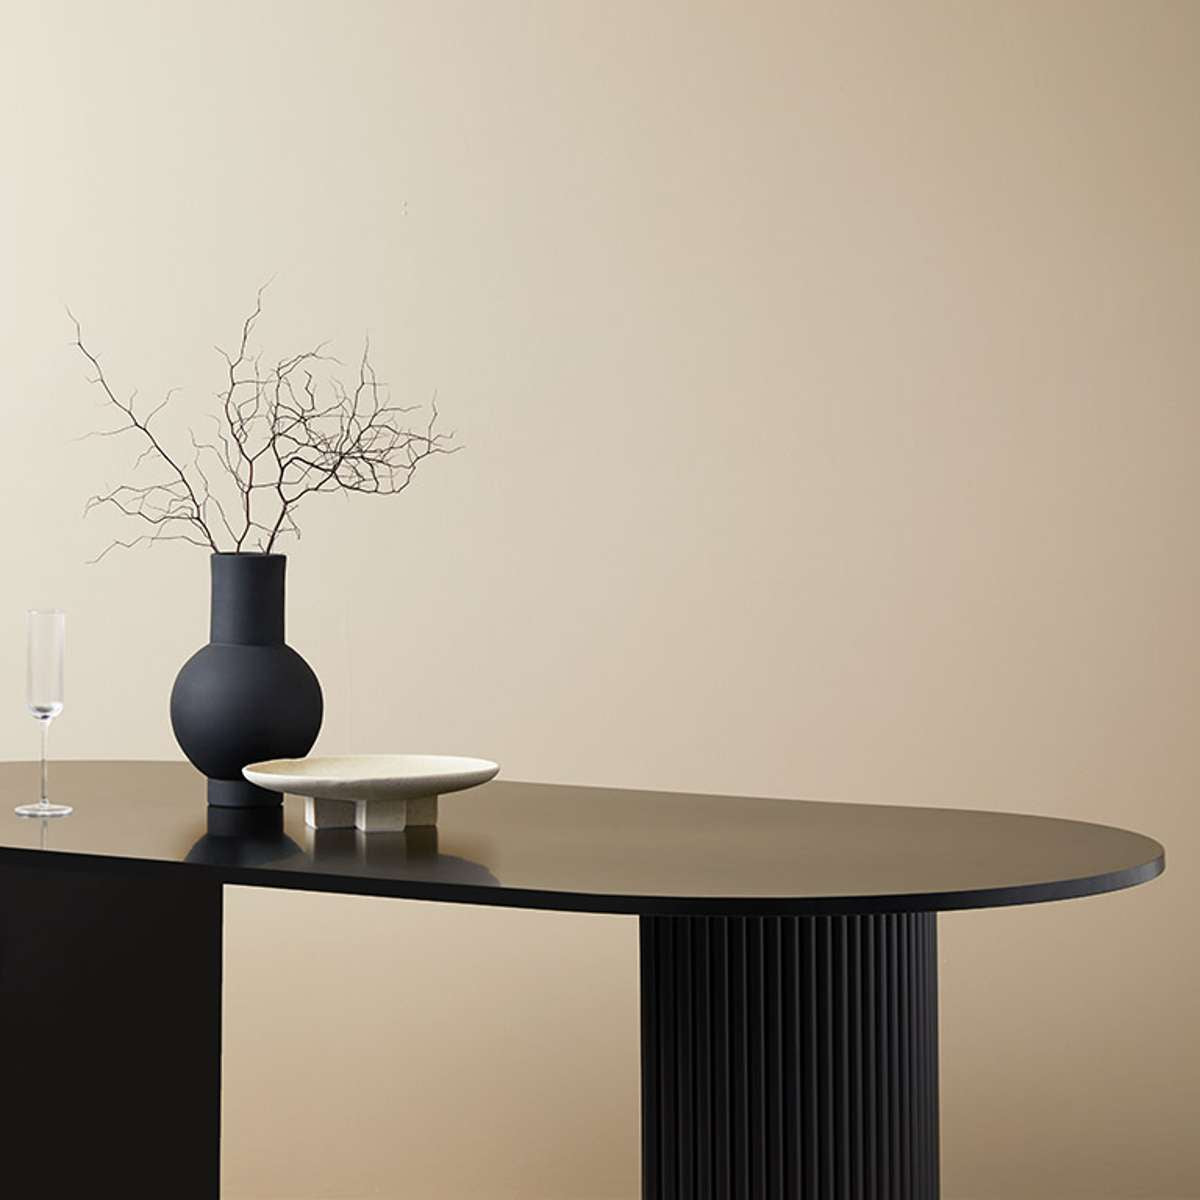 Eve 6 Seater Dining Table - Black